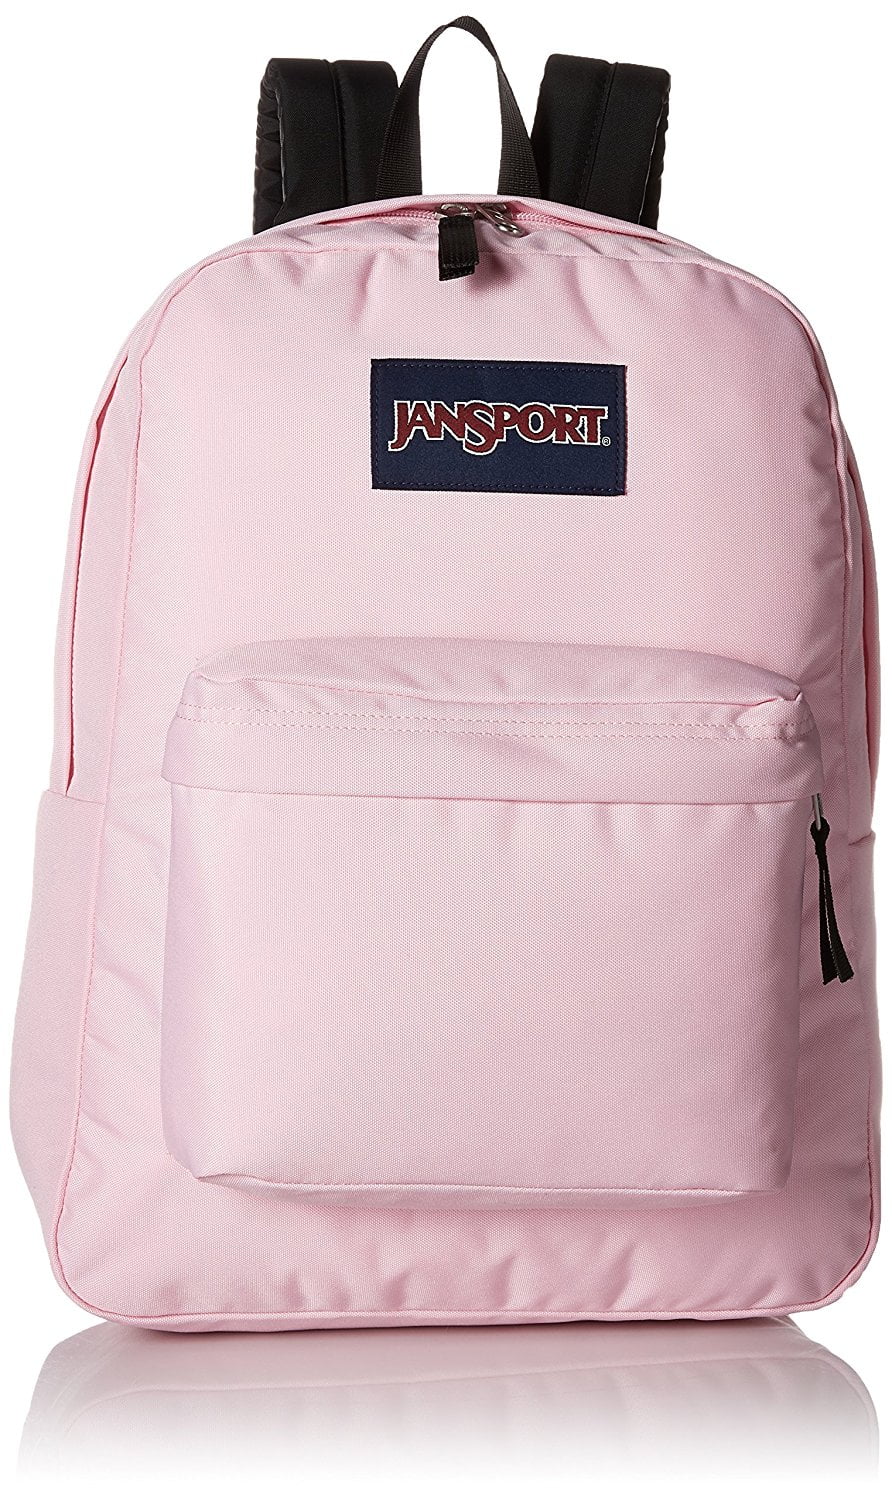 jansport backpack pink with leaves